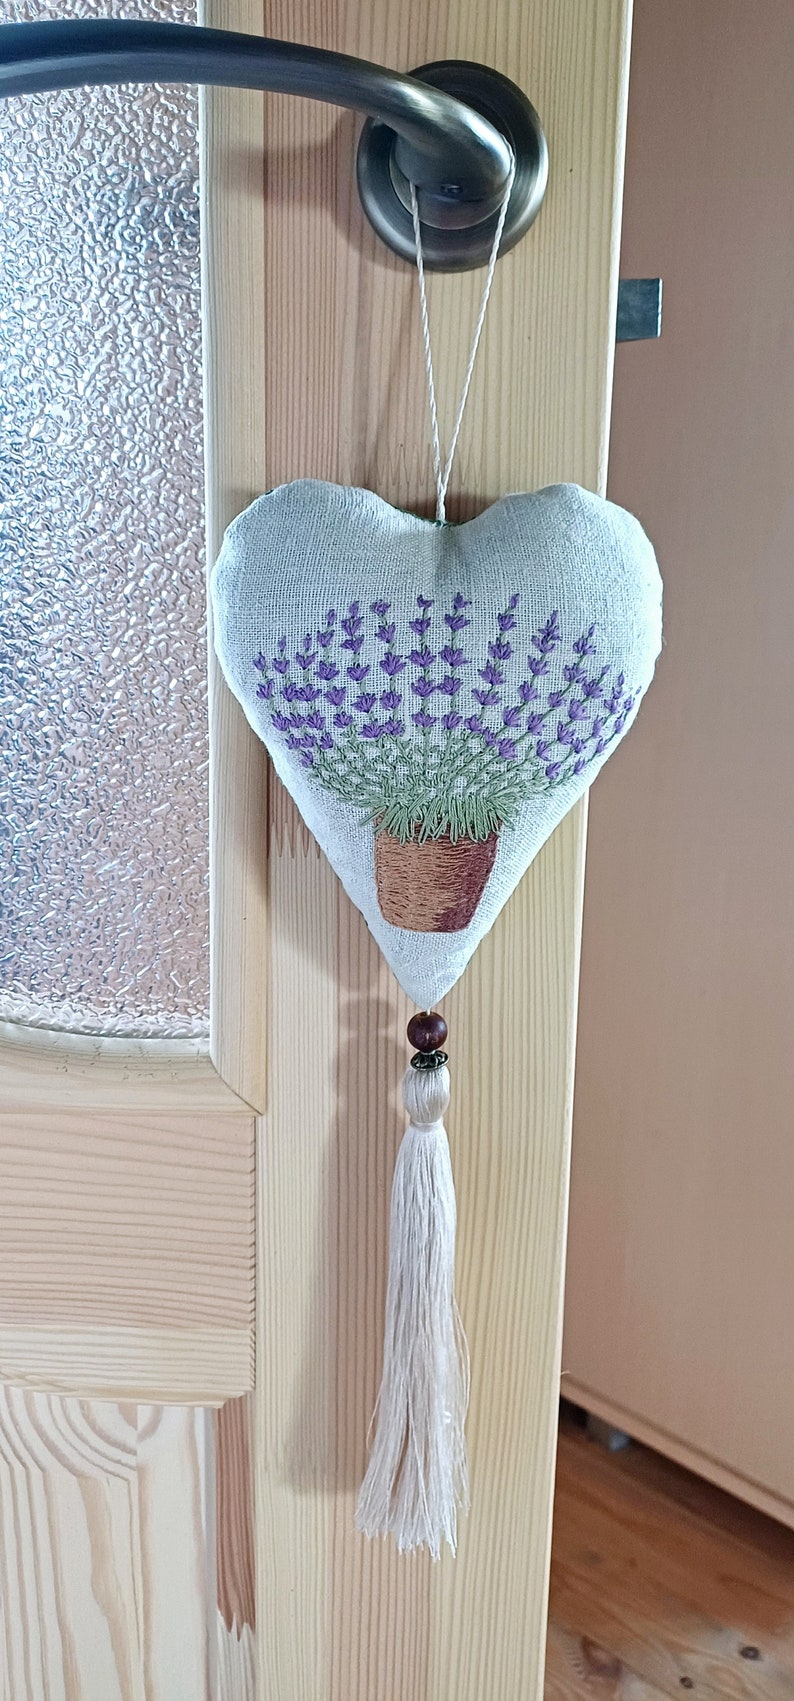 Linen handmade hand embroidered heart shaped sachet with tassel and hanging loop, filled with lavender. Finished embroidery. Embroidered pot with lavenders.